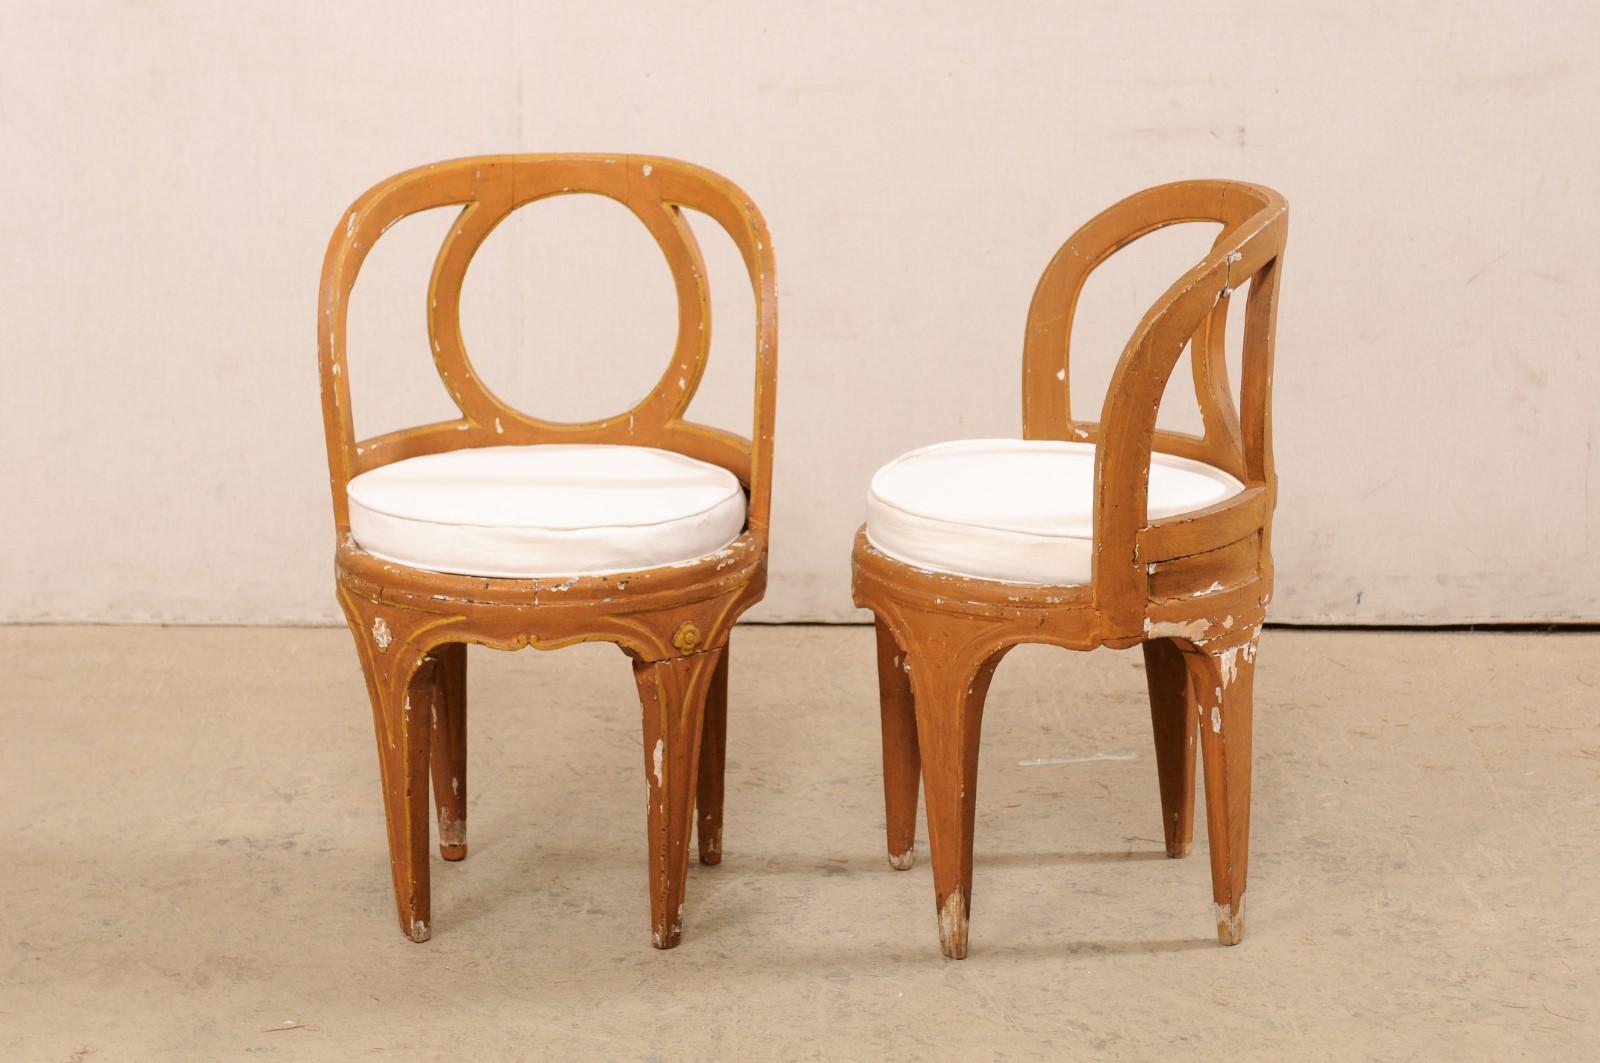 18th Century Pair of Italian Venetian Chairs with New Removable Seat Cushions For Sale 4